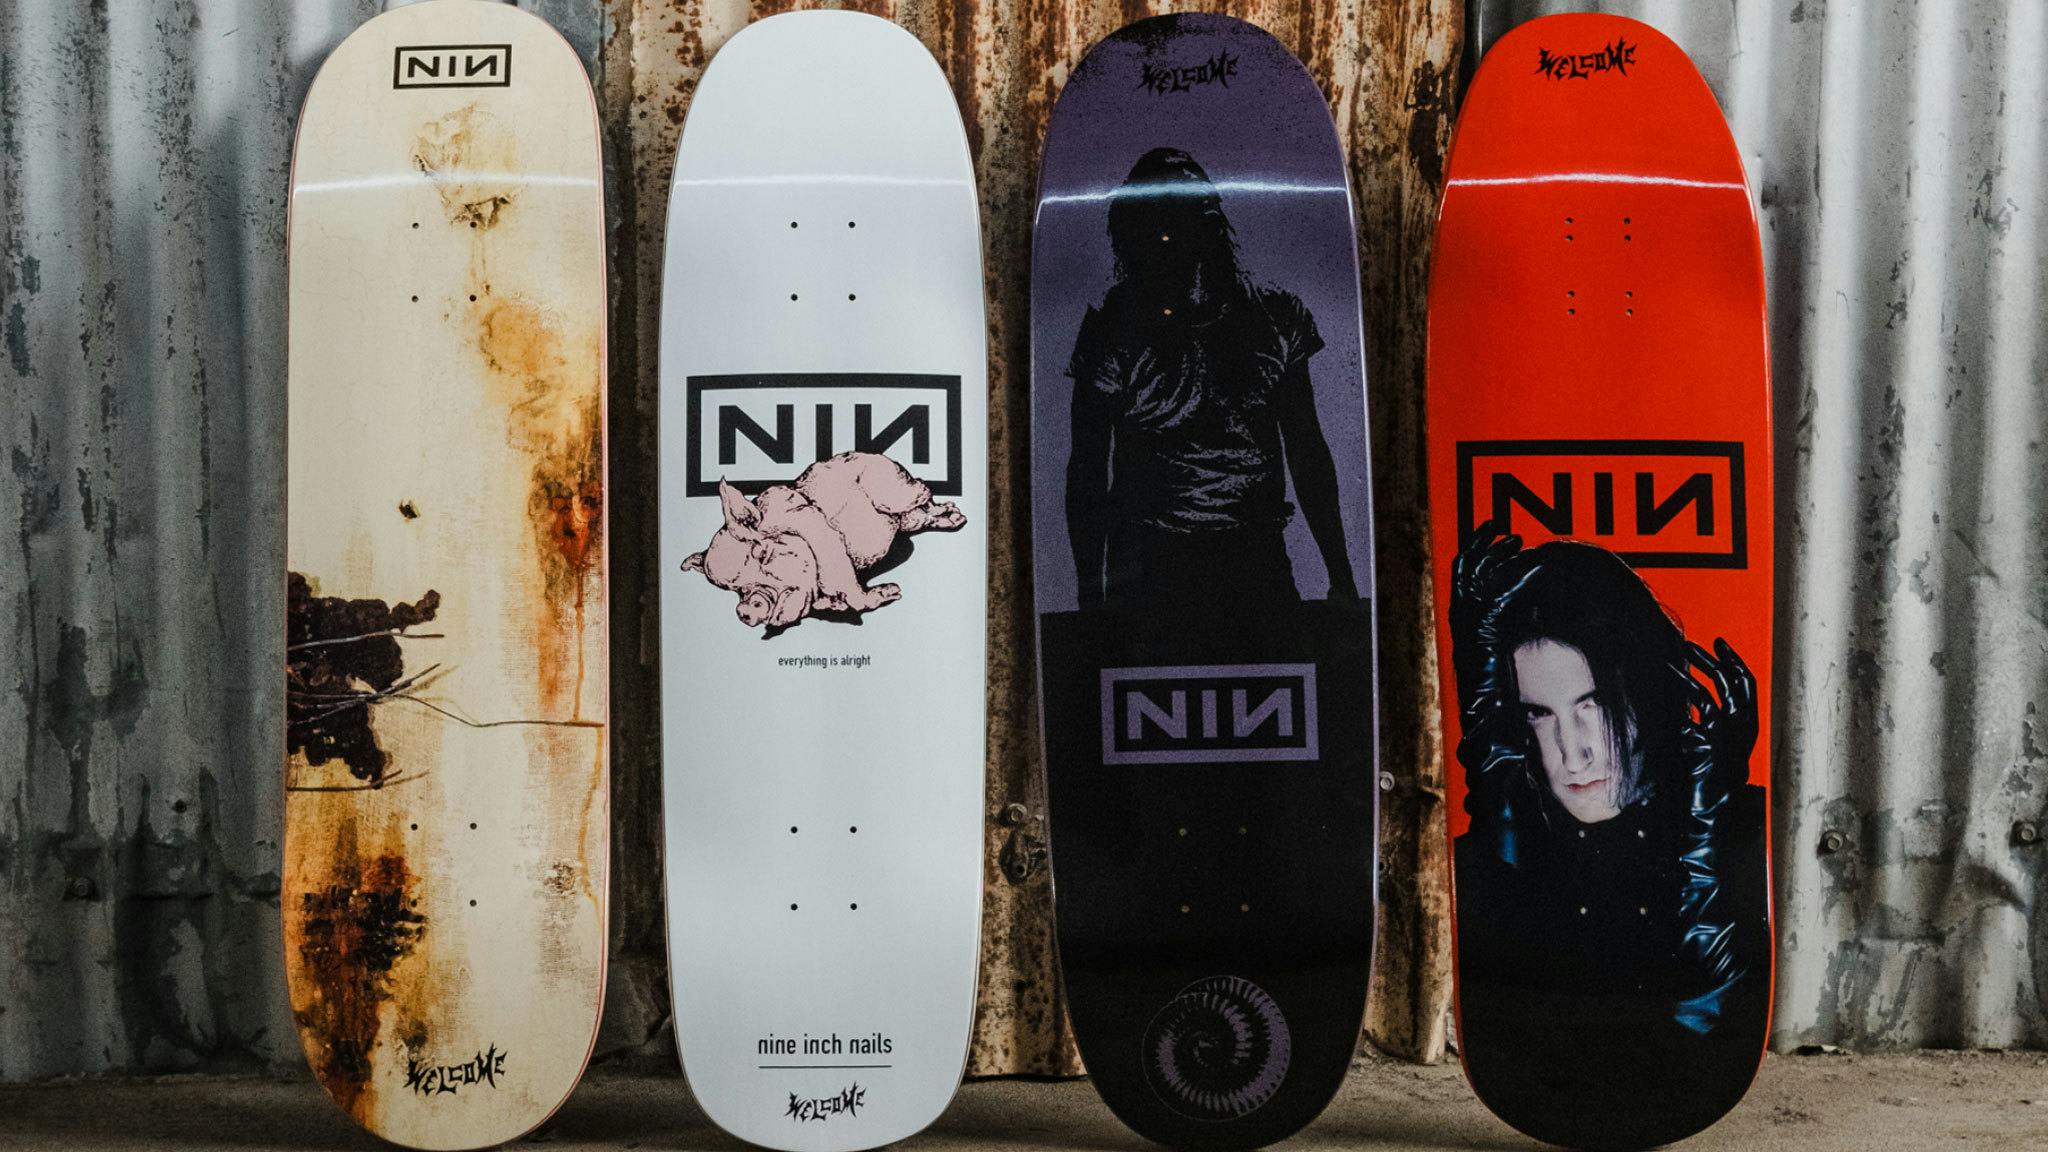 Welcome Skateboards unveil official The Downward Spiral collab with Nine Inch Nails